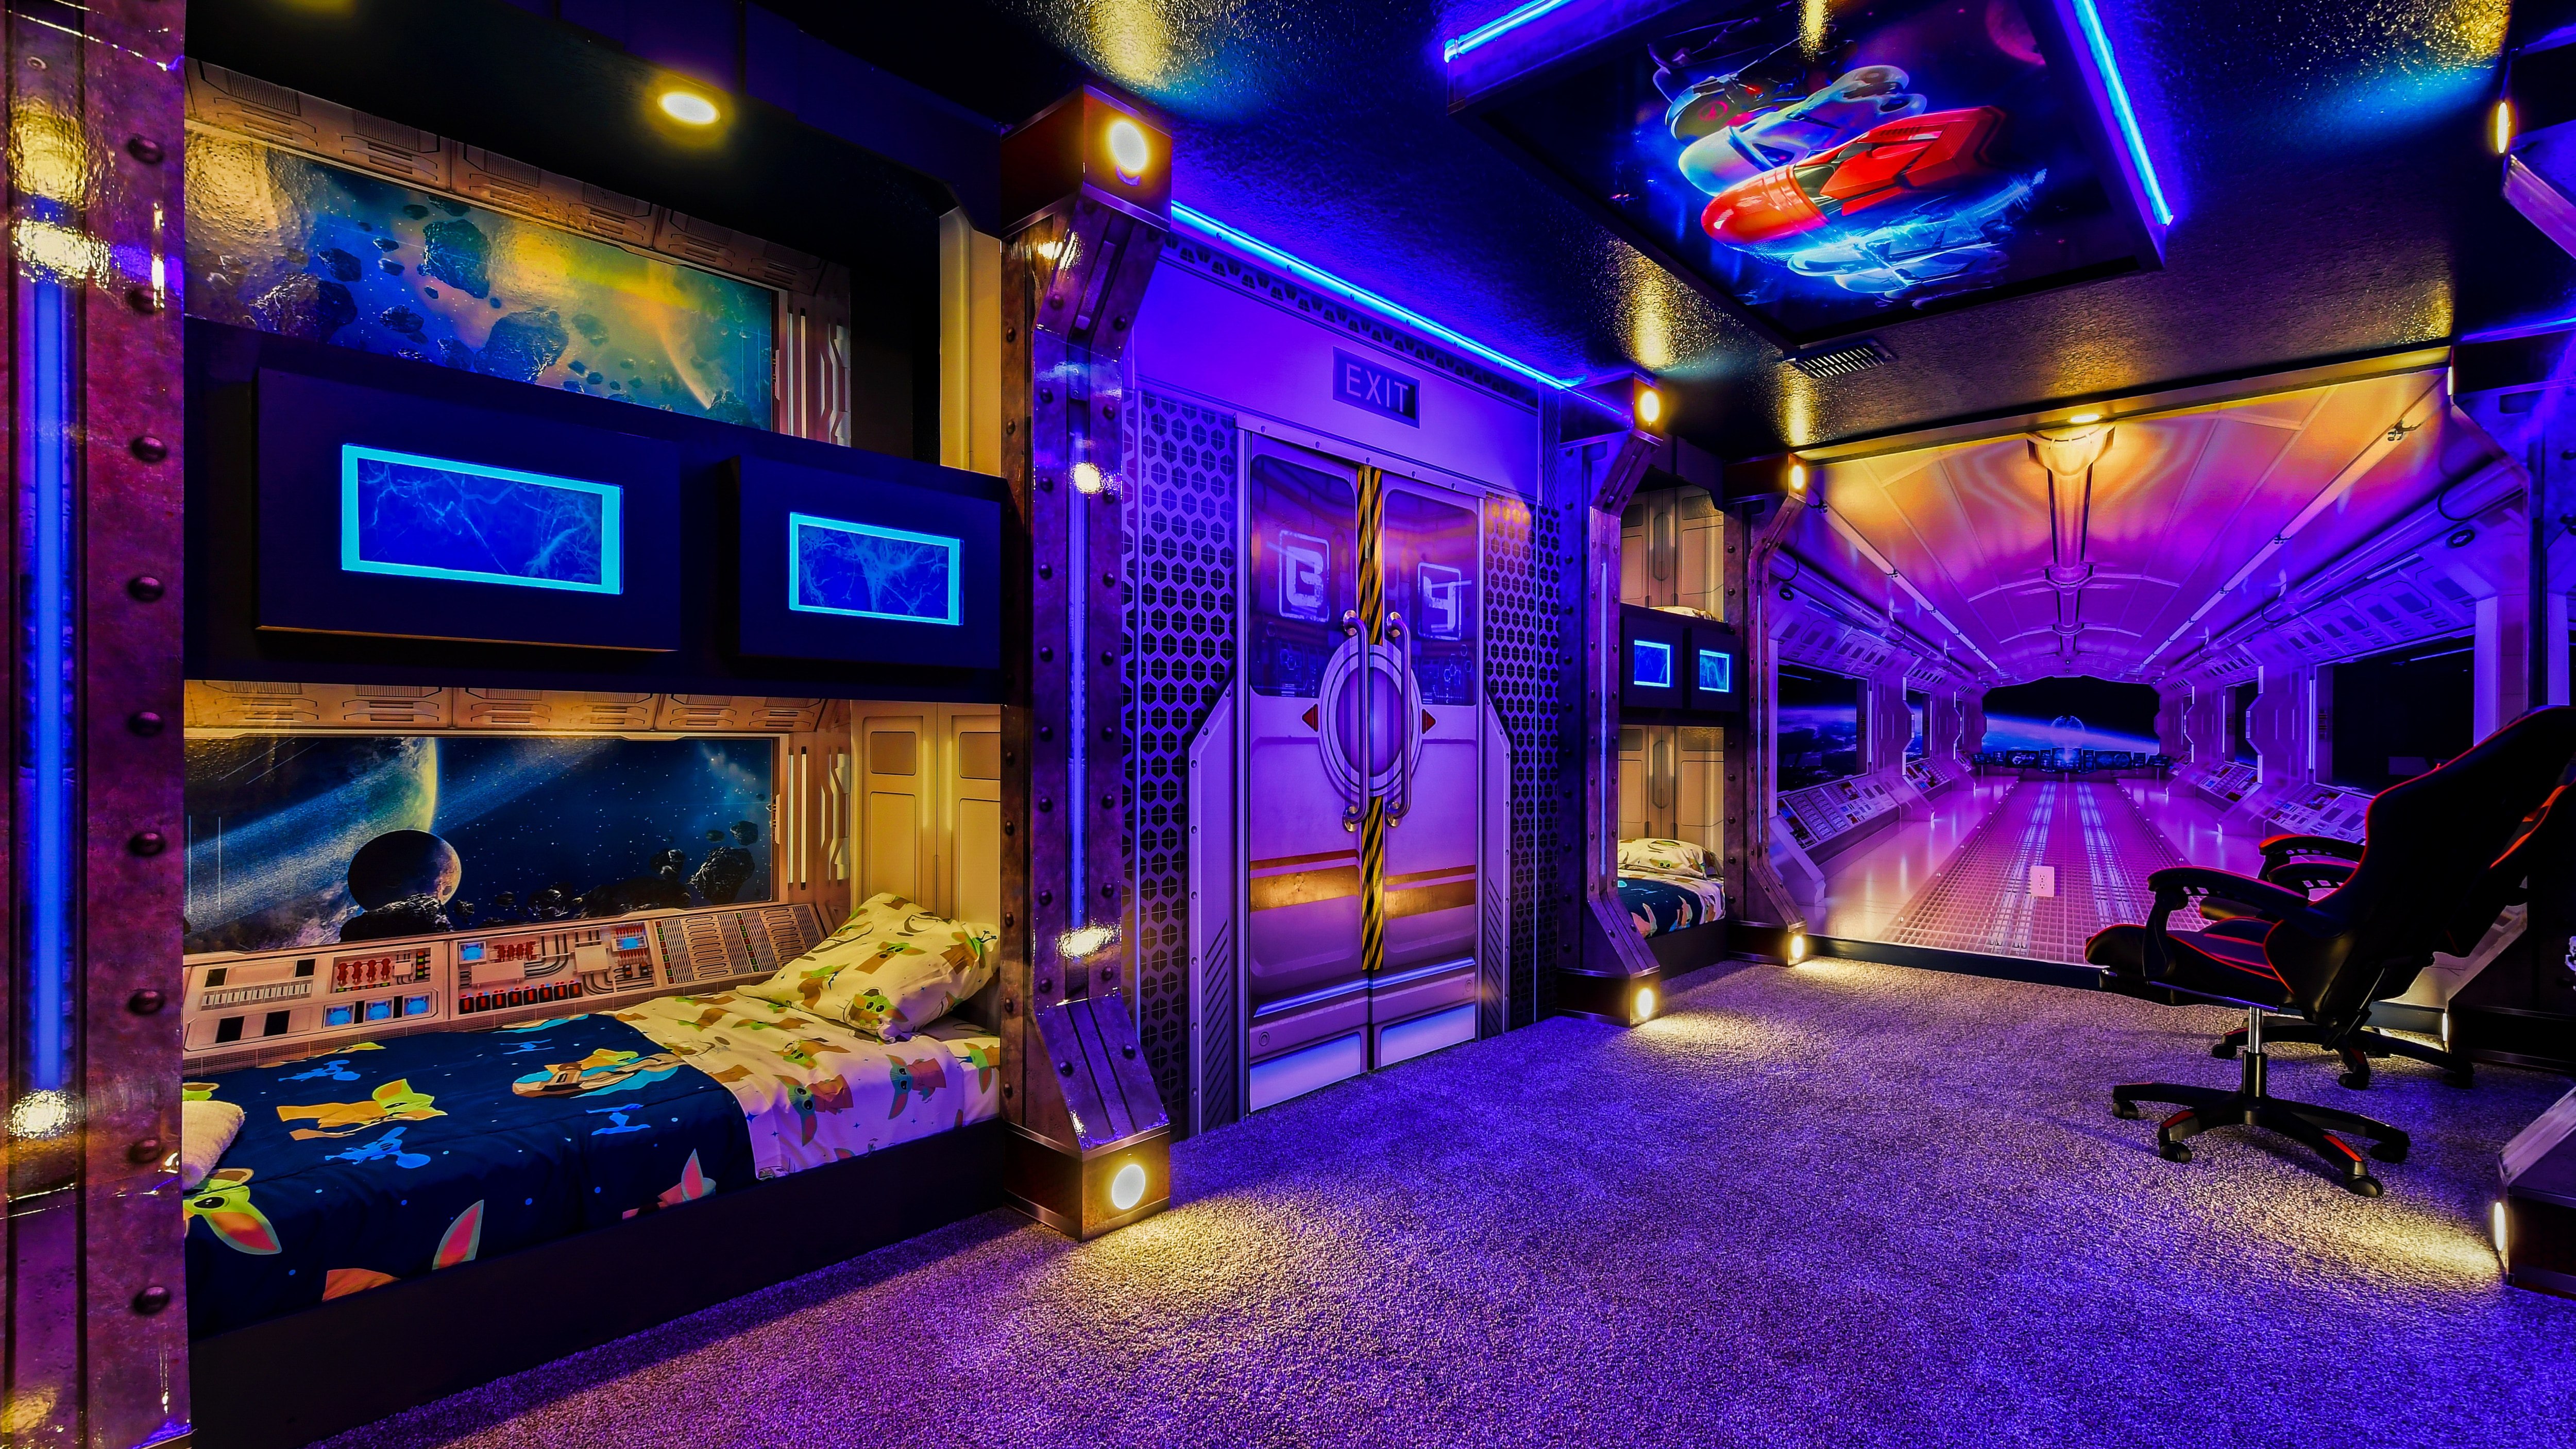 Kids will love the upstairs bedroom with a cool Star Wars theme